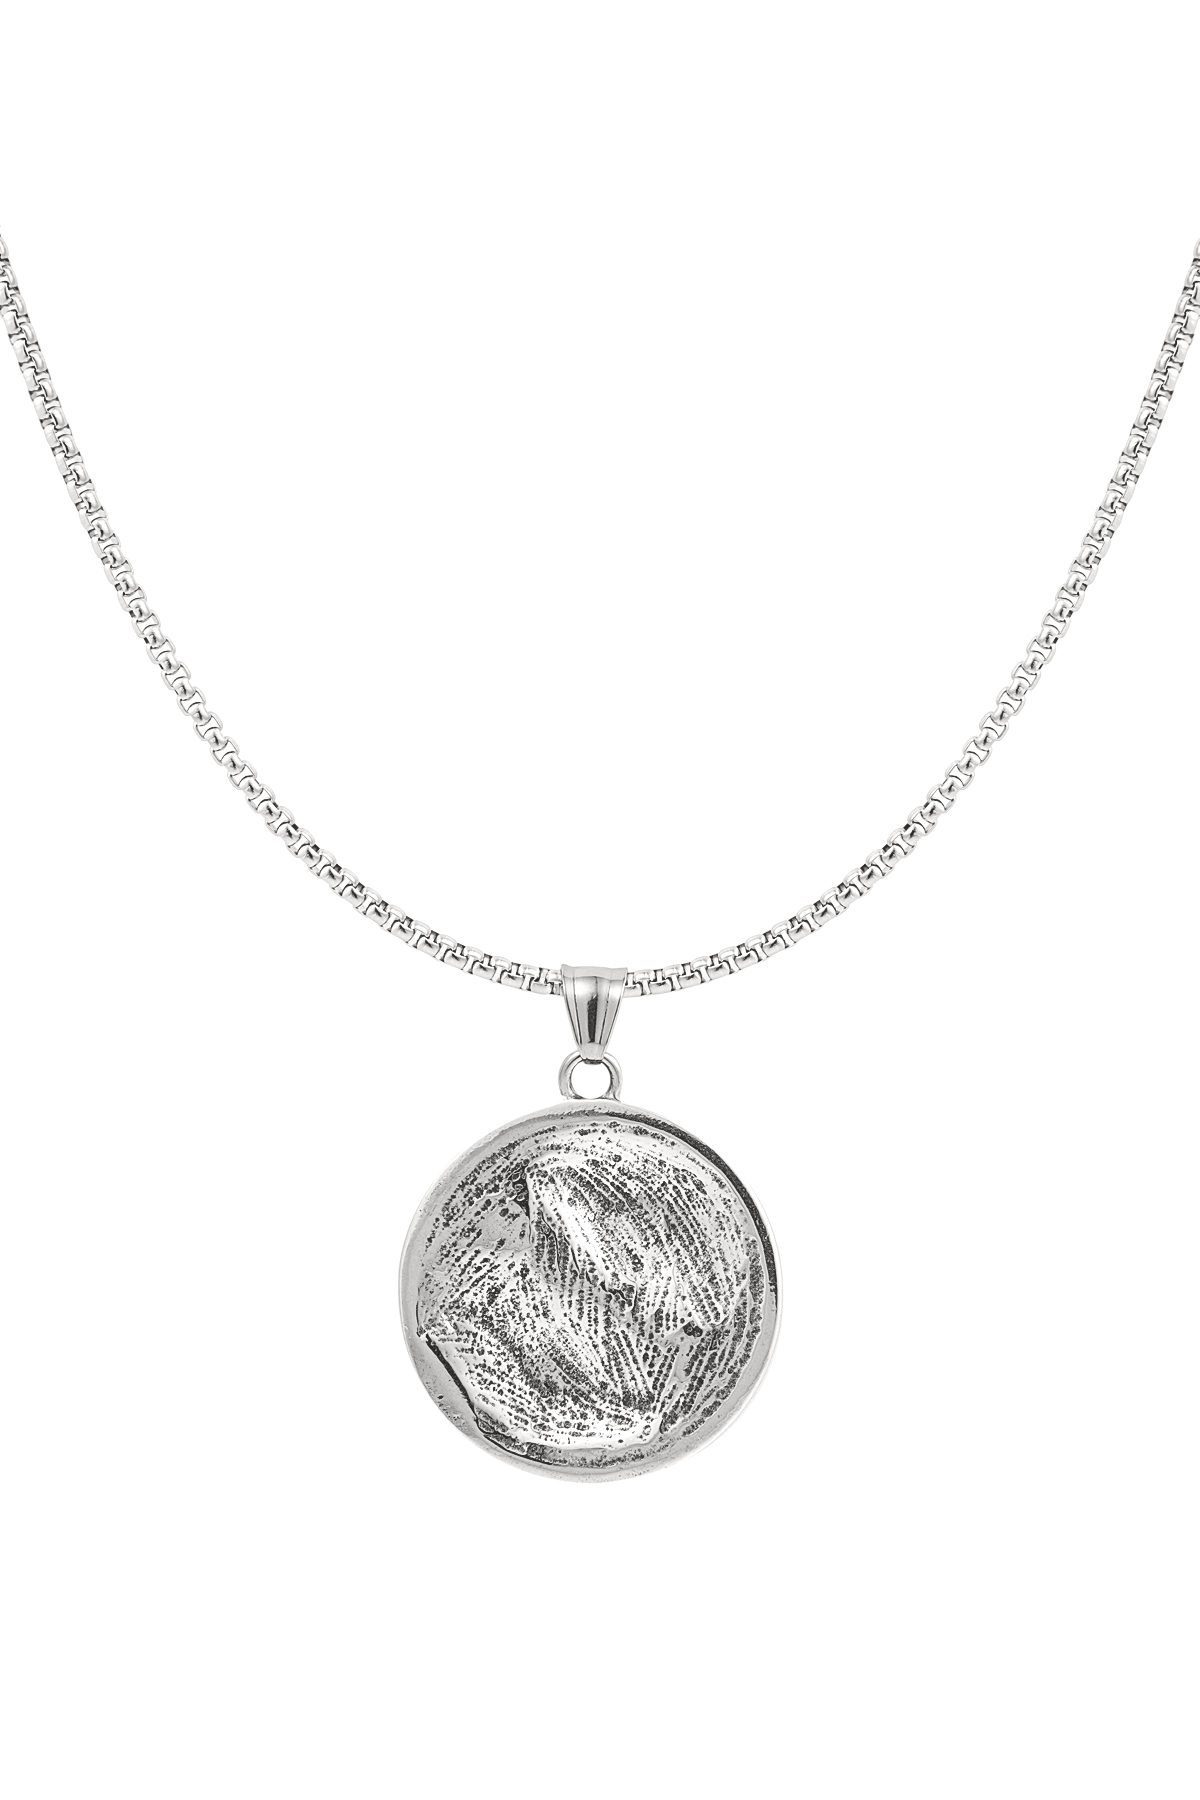 Men's necklace tiger coin - silver Picture6